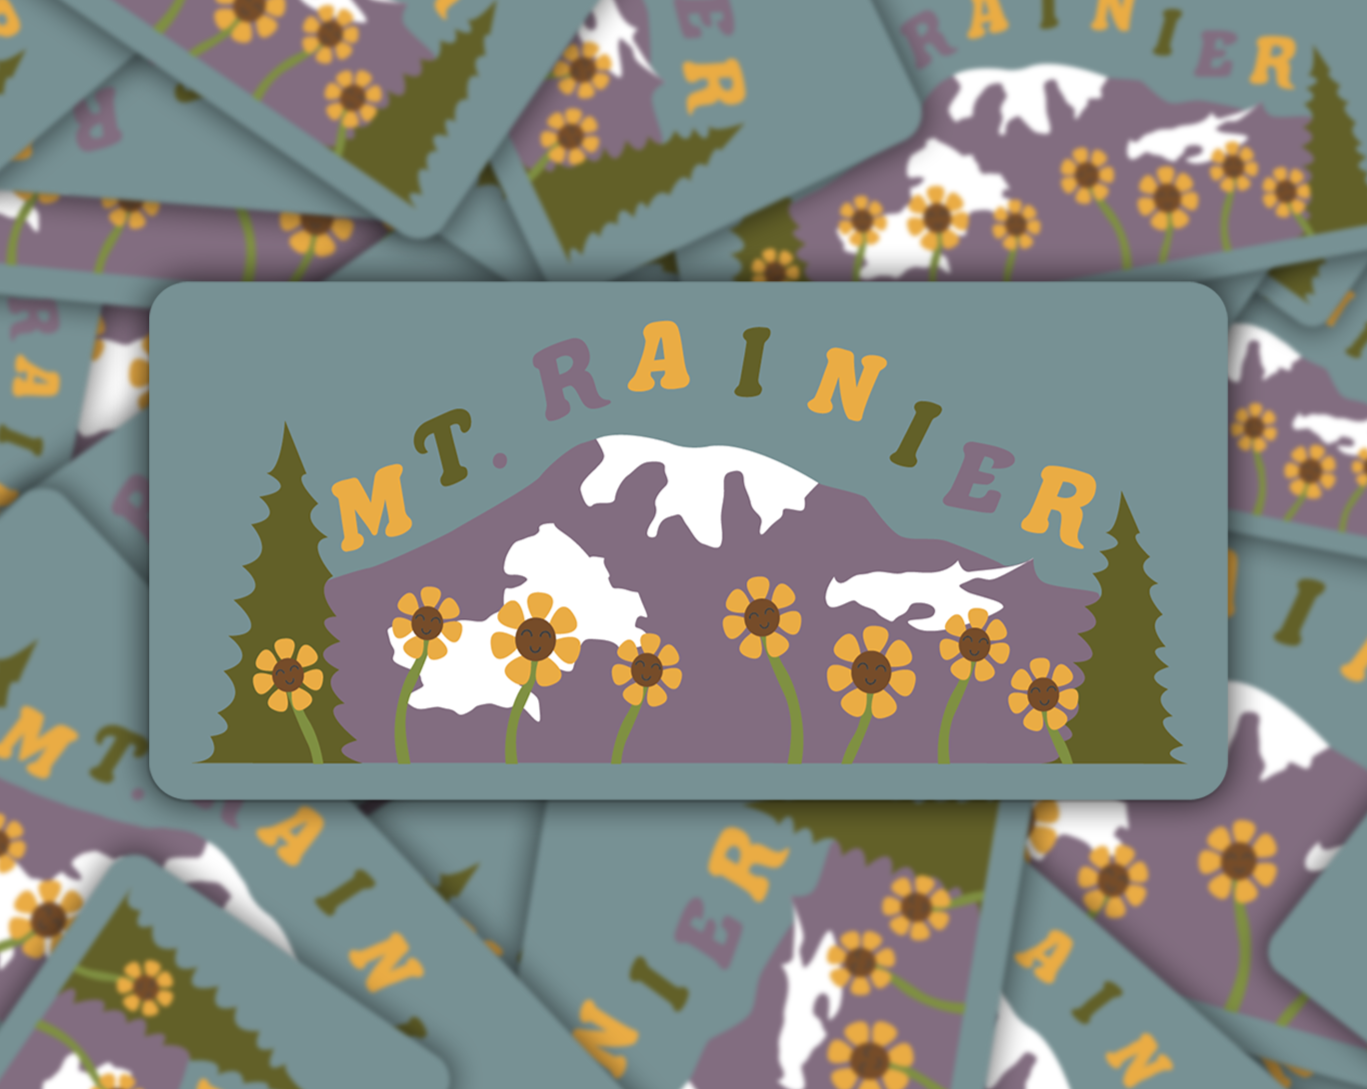 National Parks Stickers -- 39 options!